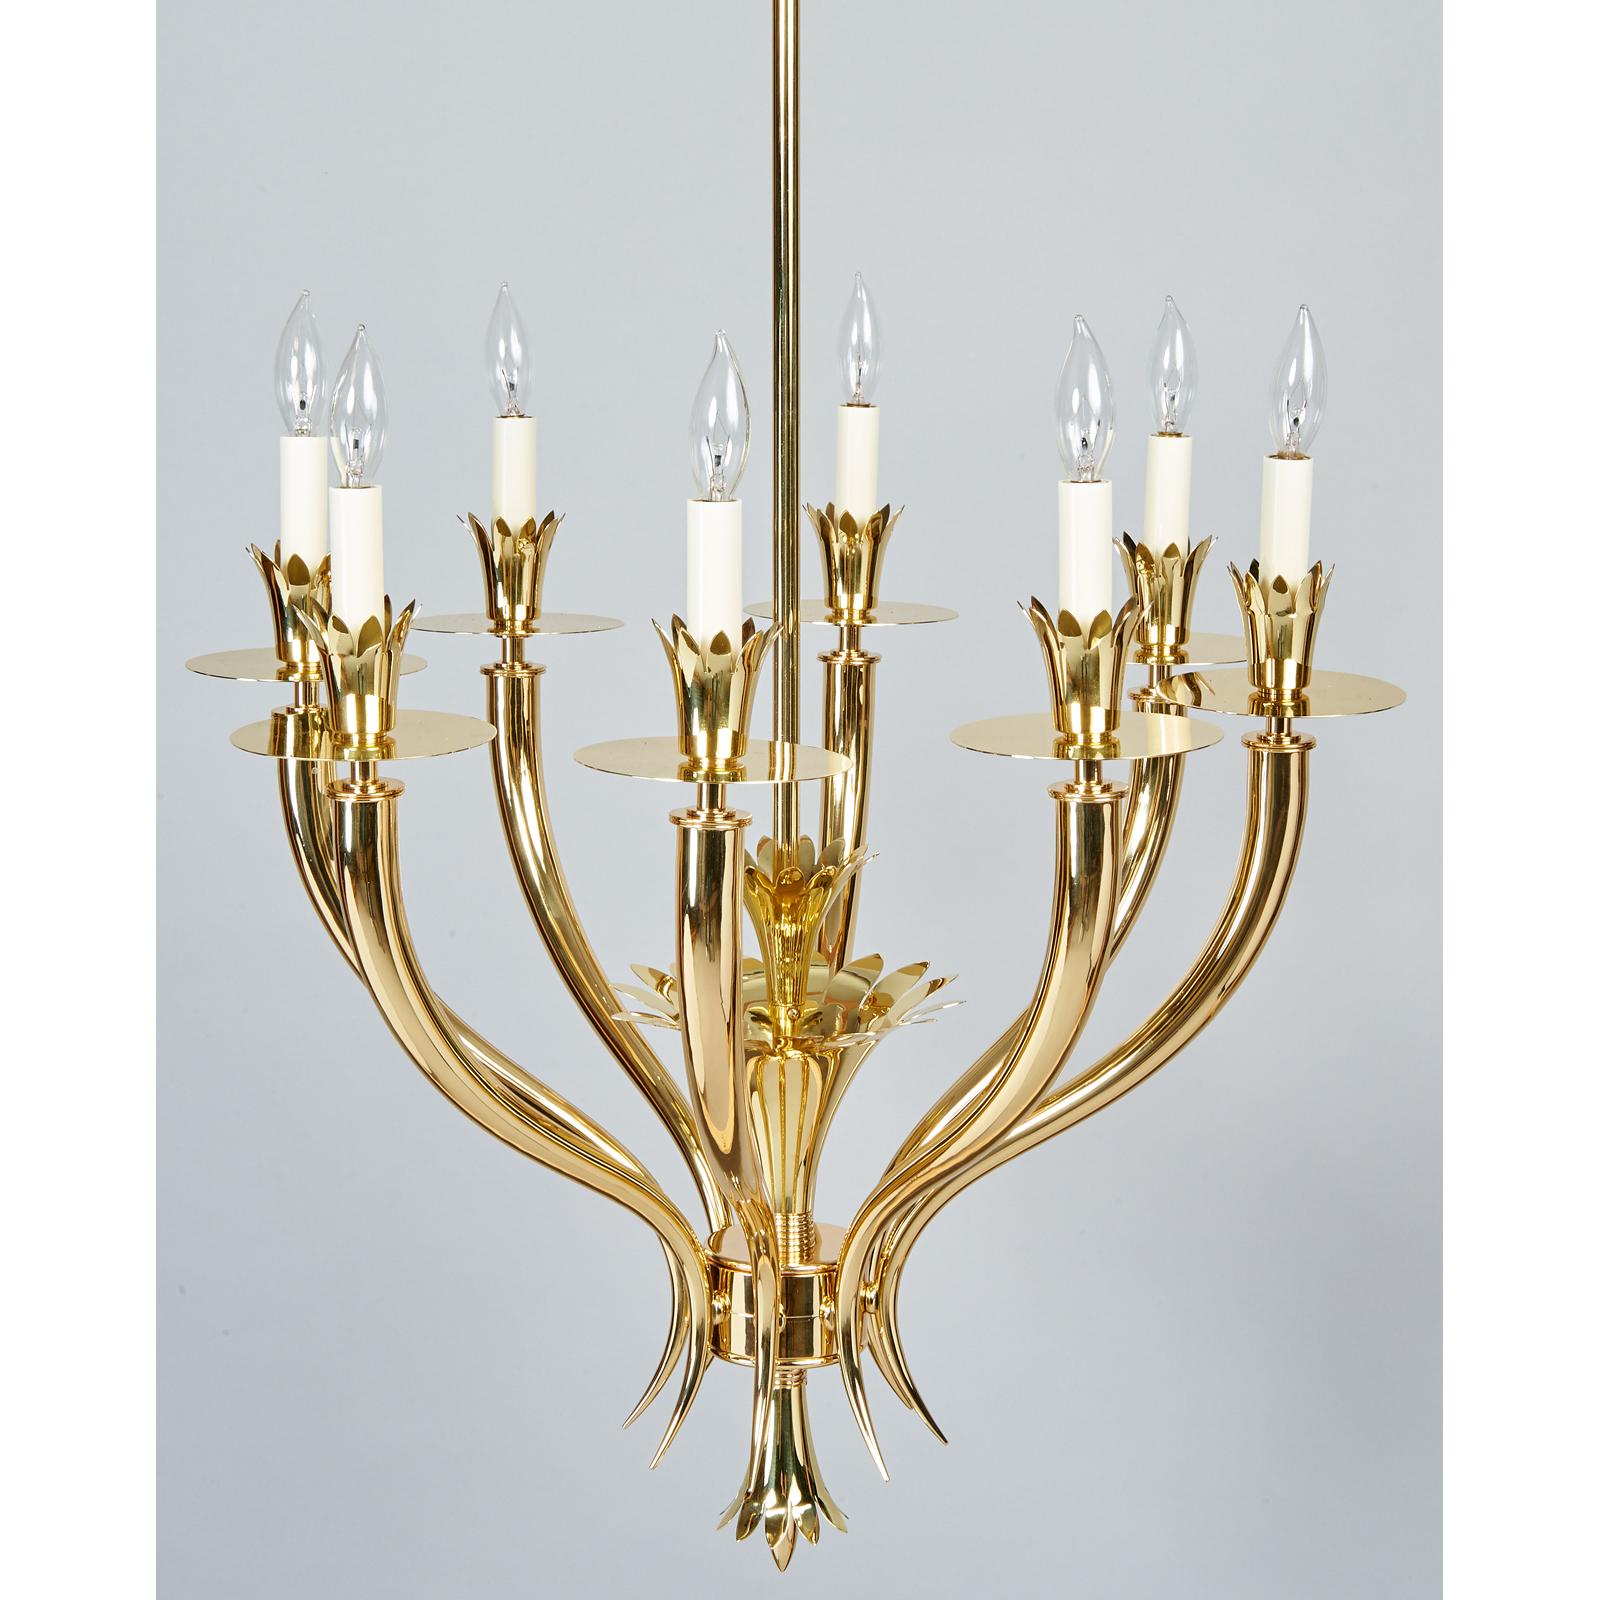 Mid-20th Century Gio Ponti: Important Geometric 8-Arm Chandelier in Polished Brass, Italy 1930s For Sale